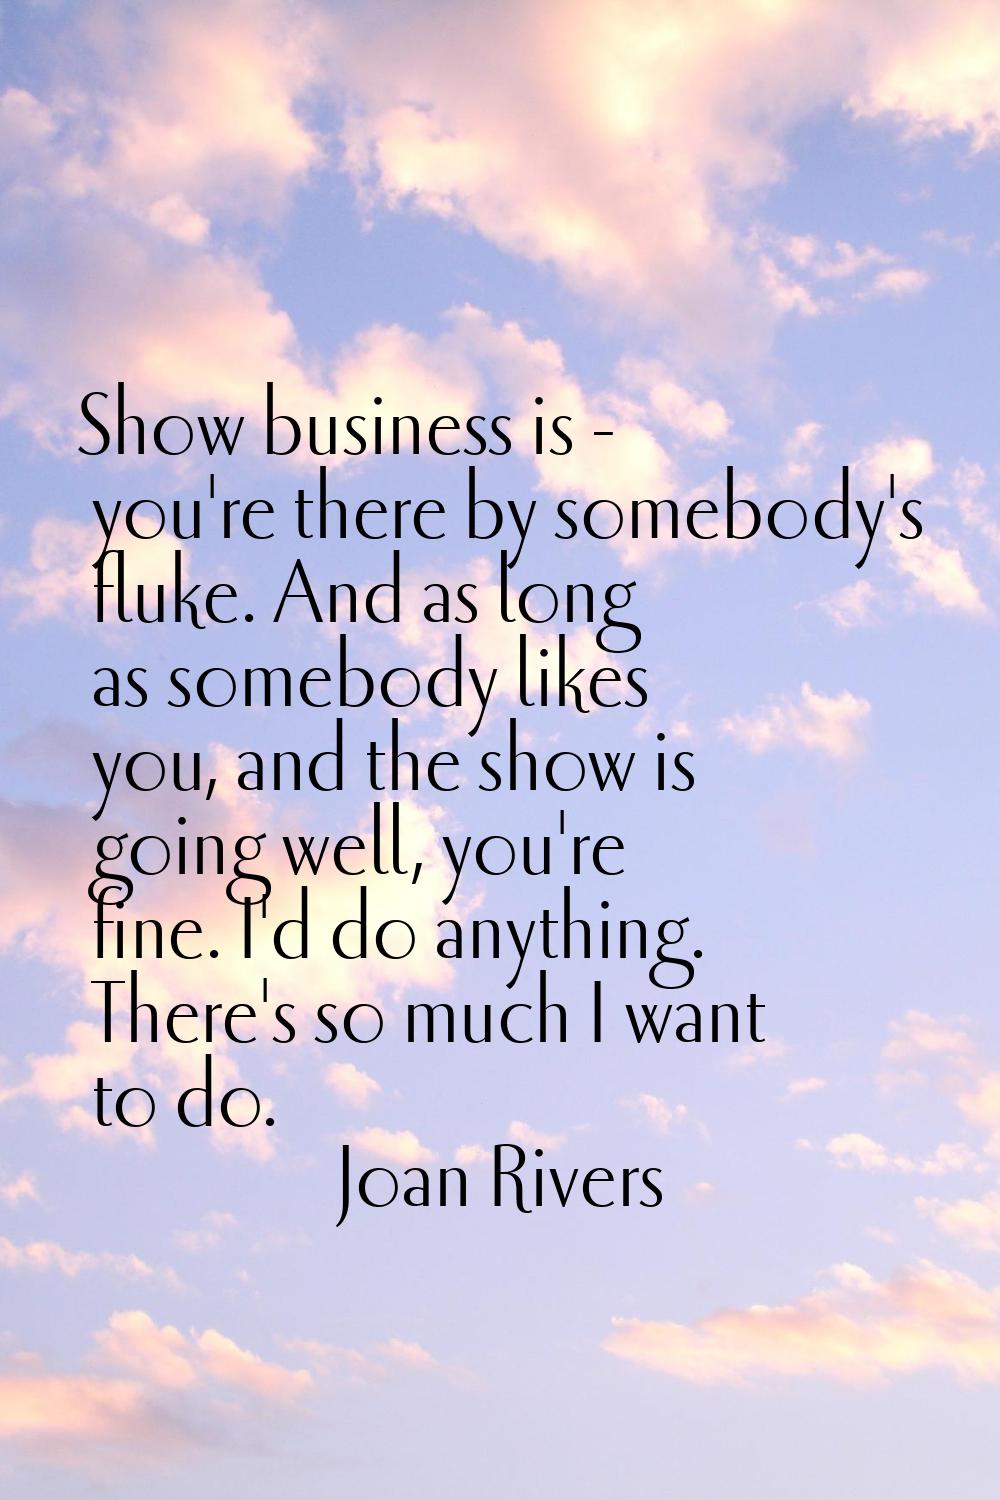 Show business is - you're there by somebody's fluke. And as long as somebody likes you, and the sho